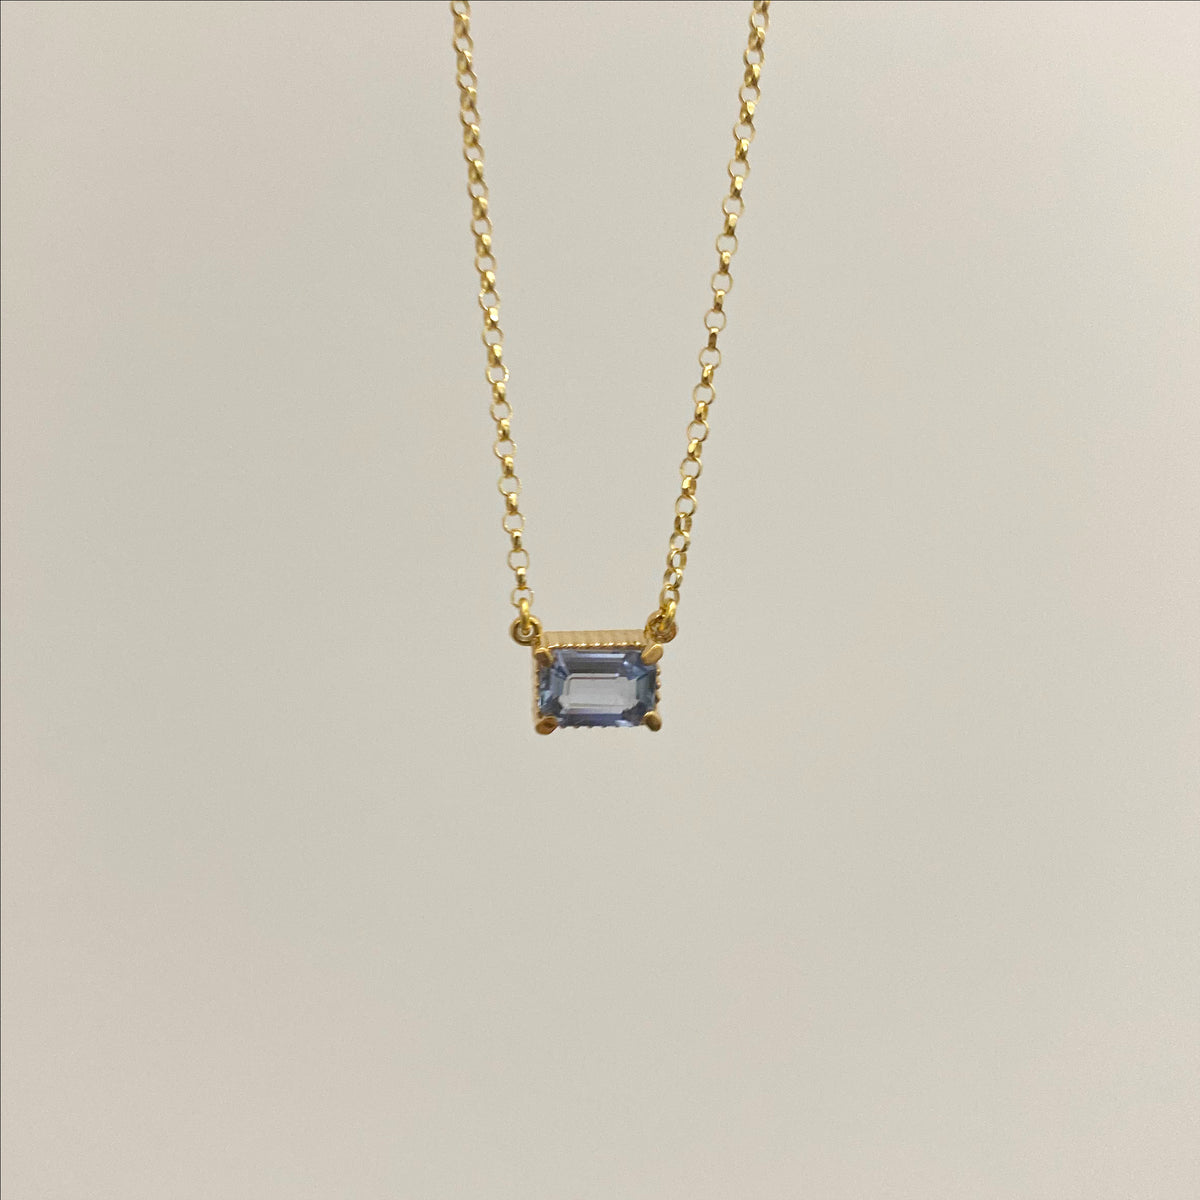 Noe Necklace - Solid Gold